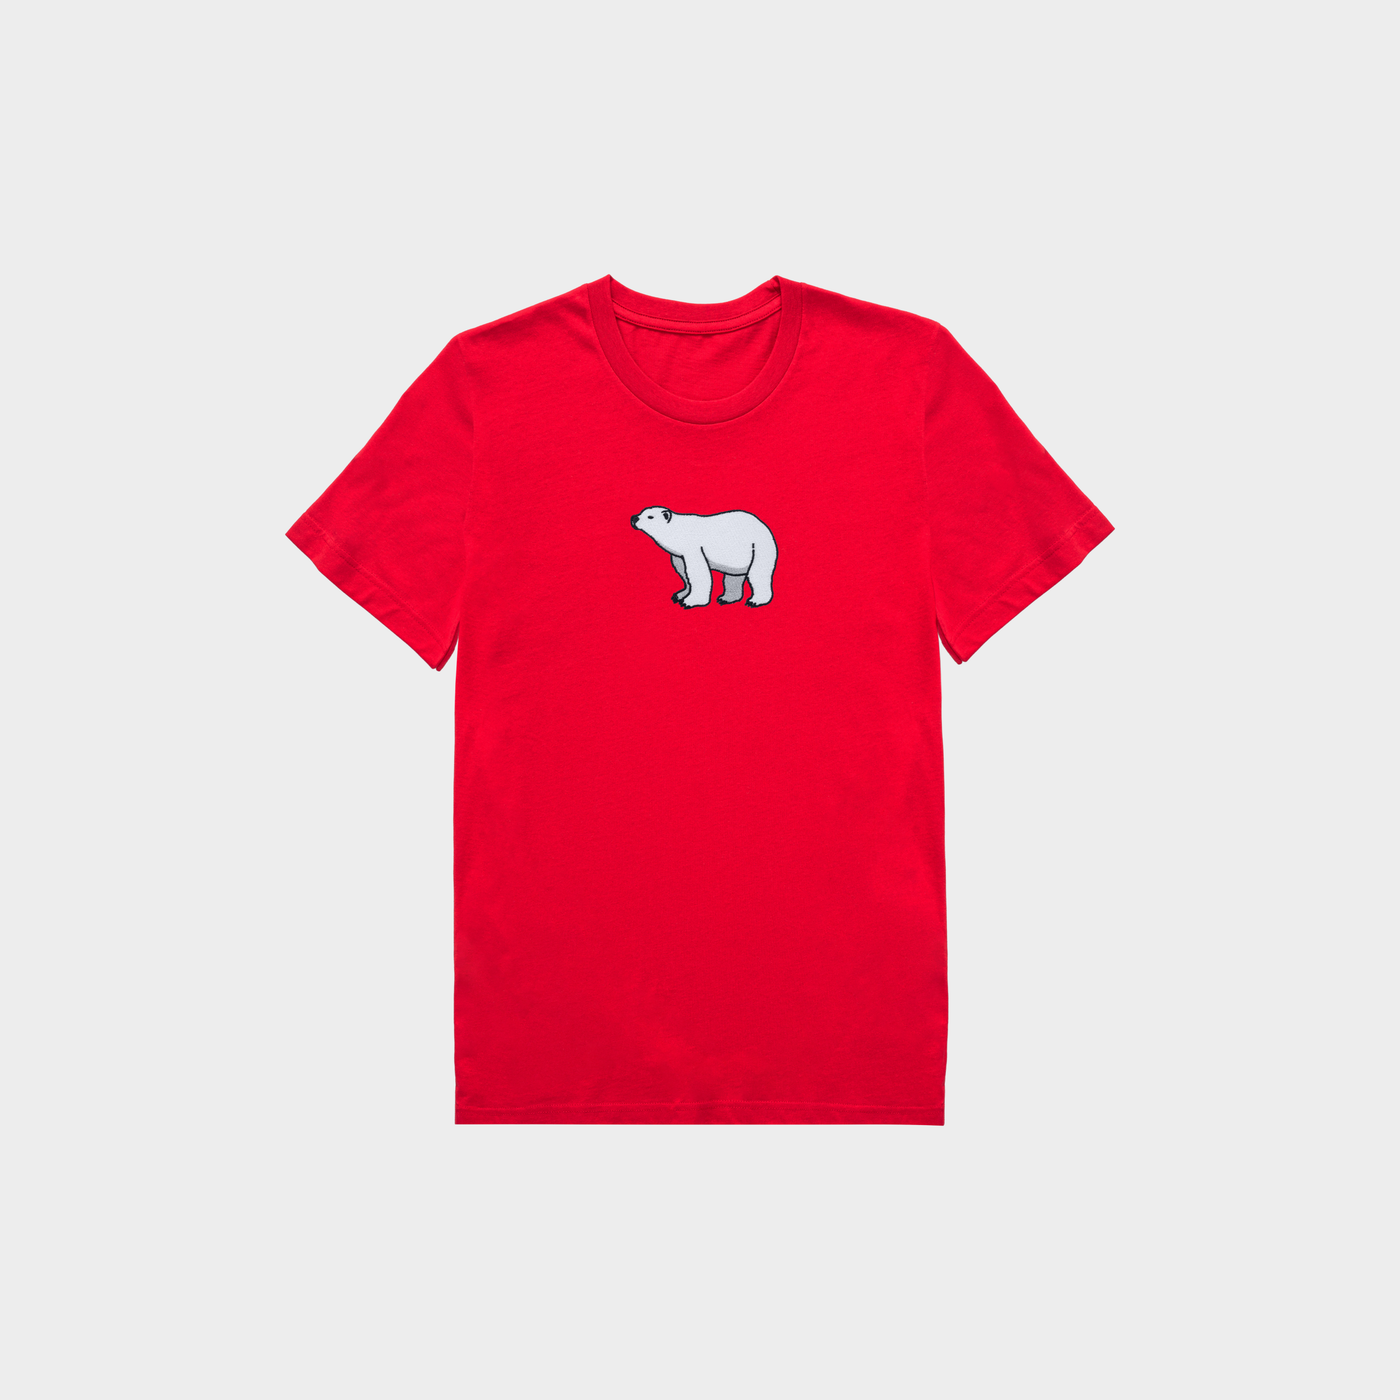 Bobby's Planet Kids Embroidered Polar Bear T-Shirt from Arctic Polar Animals Collection in Red Color#color_red